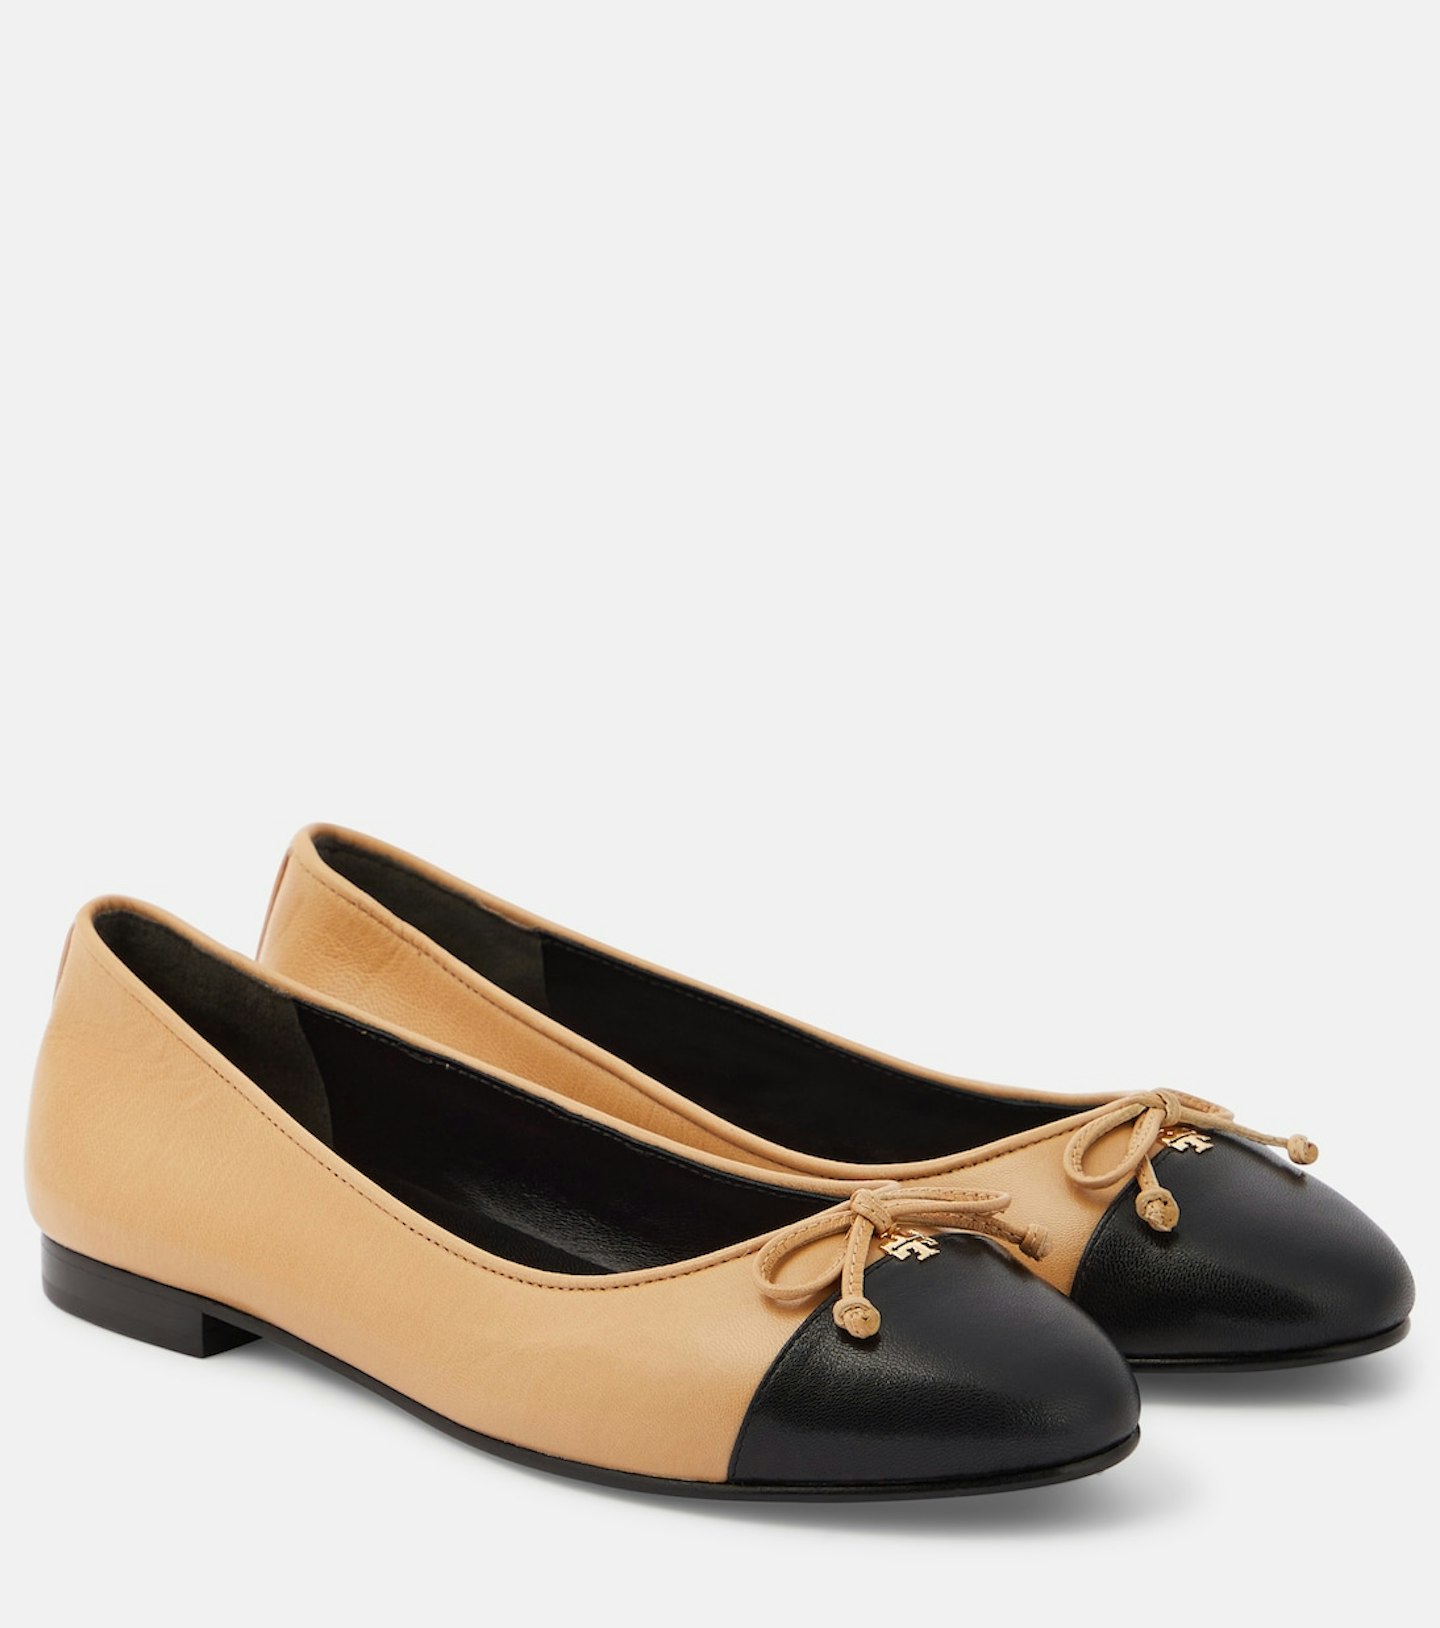 Tory Burch, Bow-Detail Leather Ballet Flats